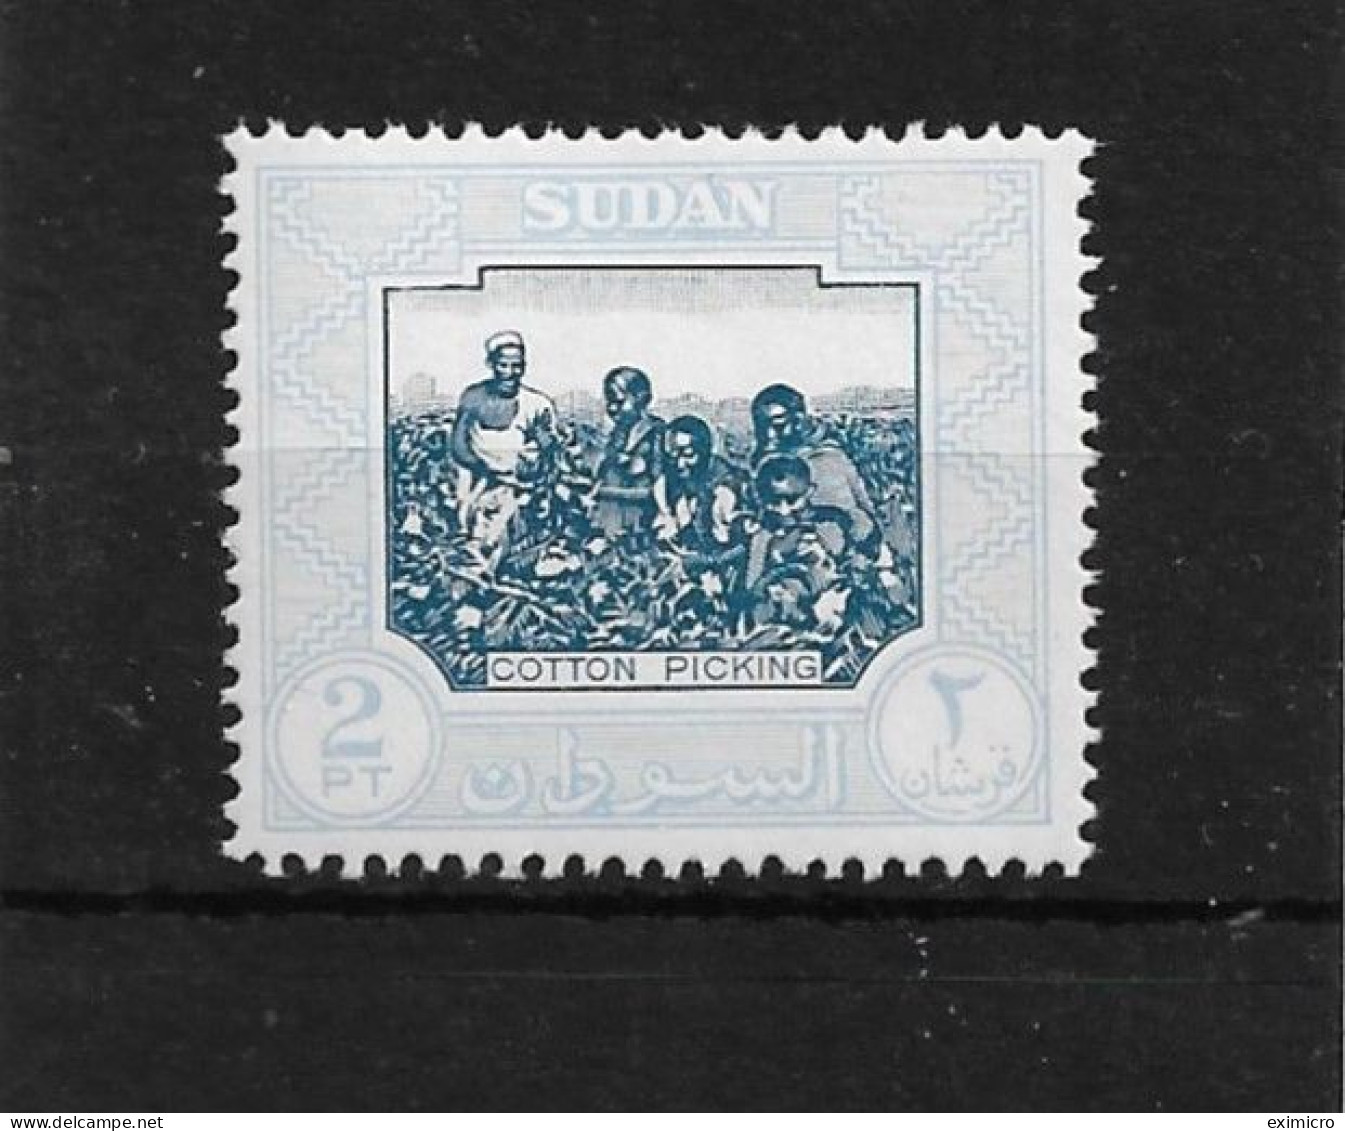 SUDAN 1951 - 1961 2p SG 130a DEEP BLUE AND VERY PALE BLUE UNMOUNTED MINT Cat £12 - Soudan (...-1951)